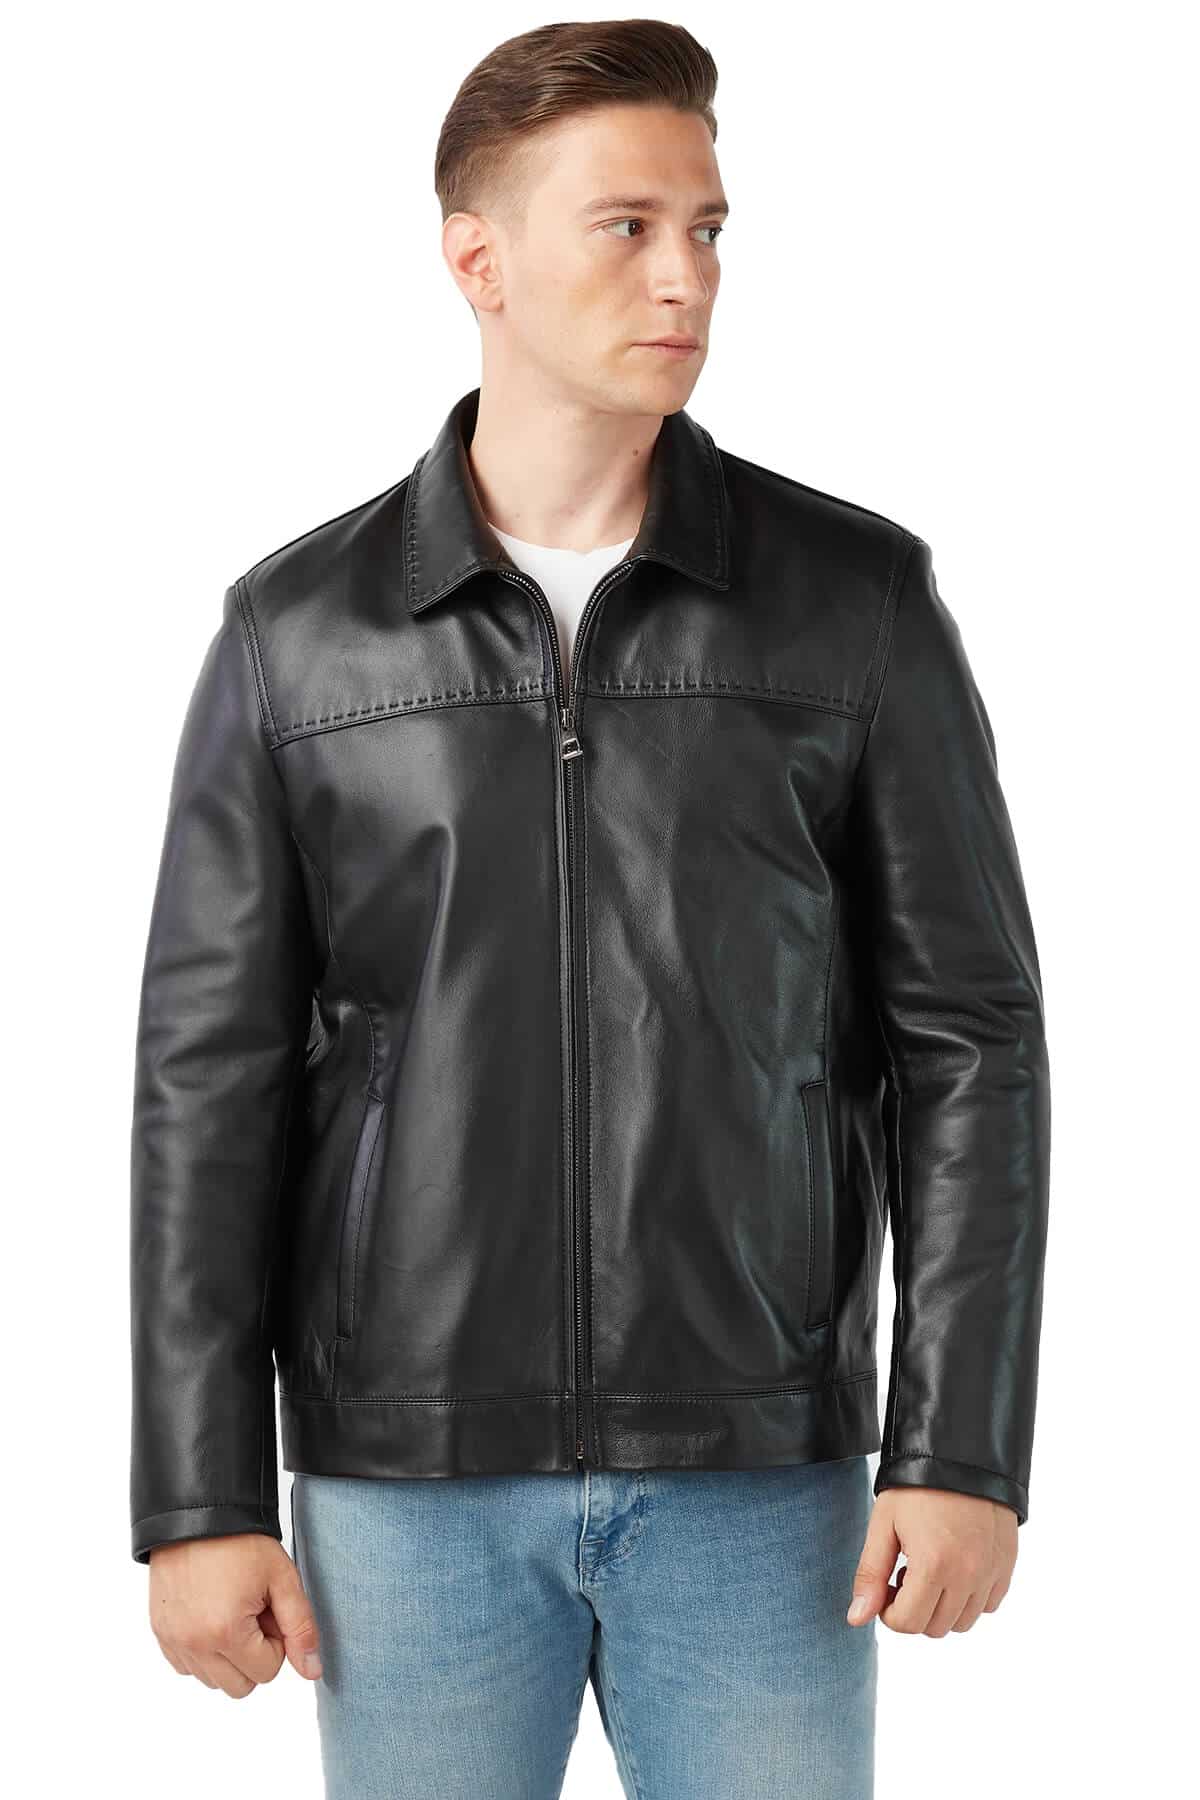 Men's 100 % Real Black Leather Point Stitched Jacket